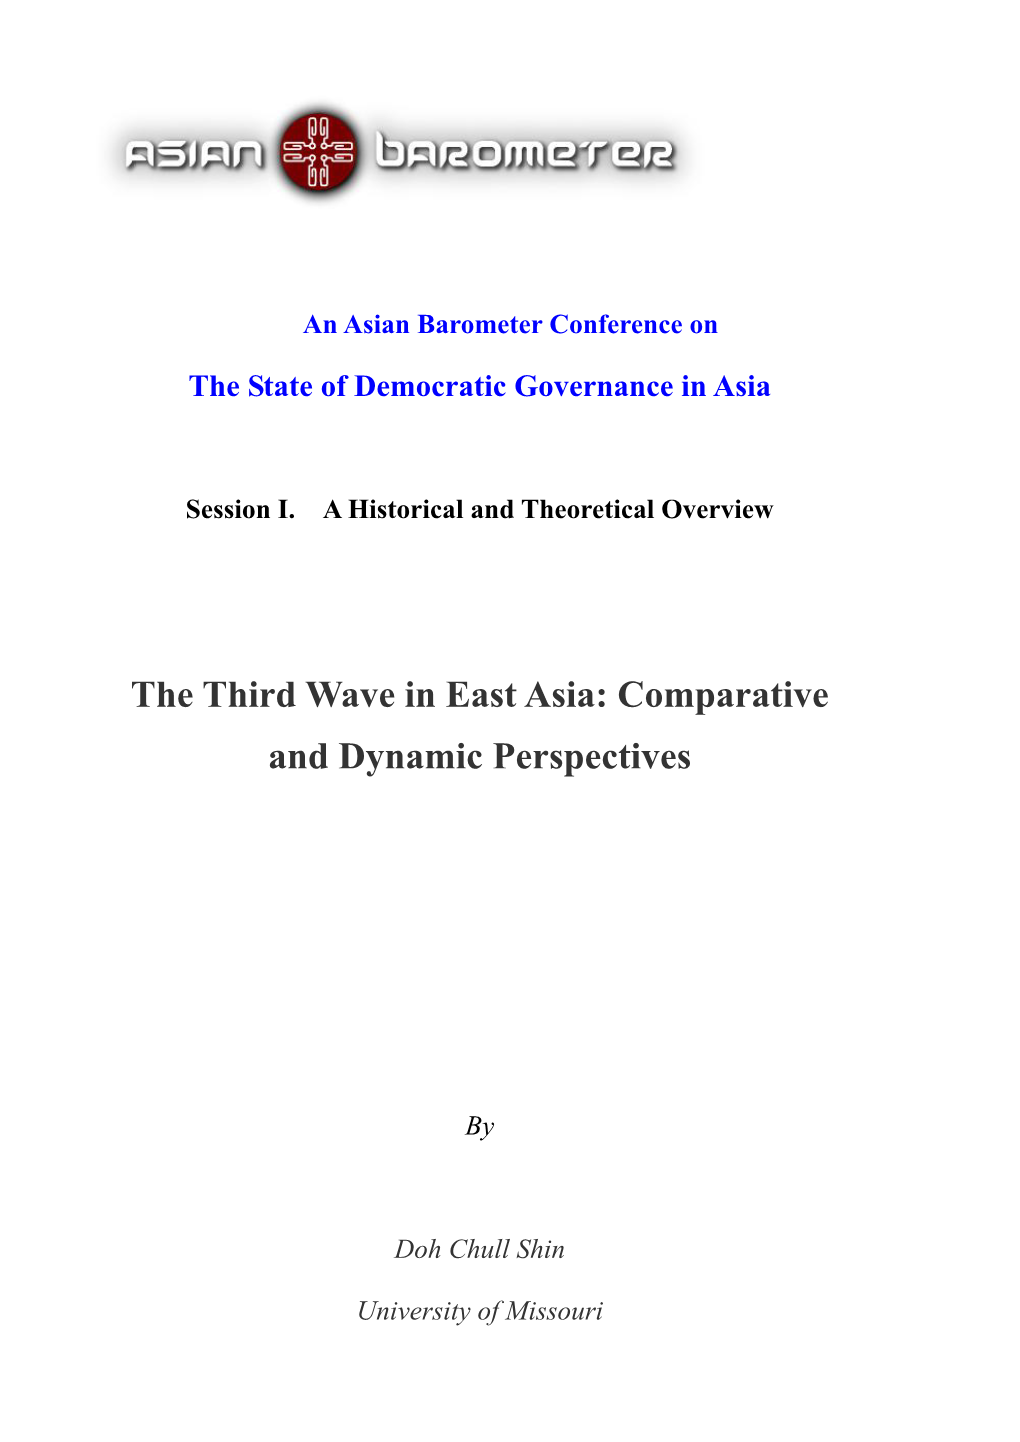 The Third Wave in East Asia: Comparative and Dynamic Perspectives